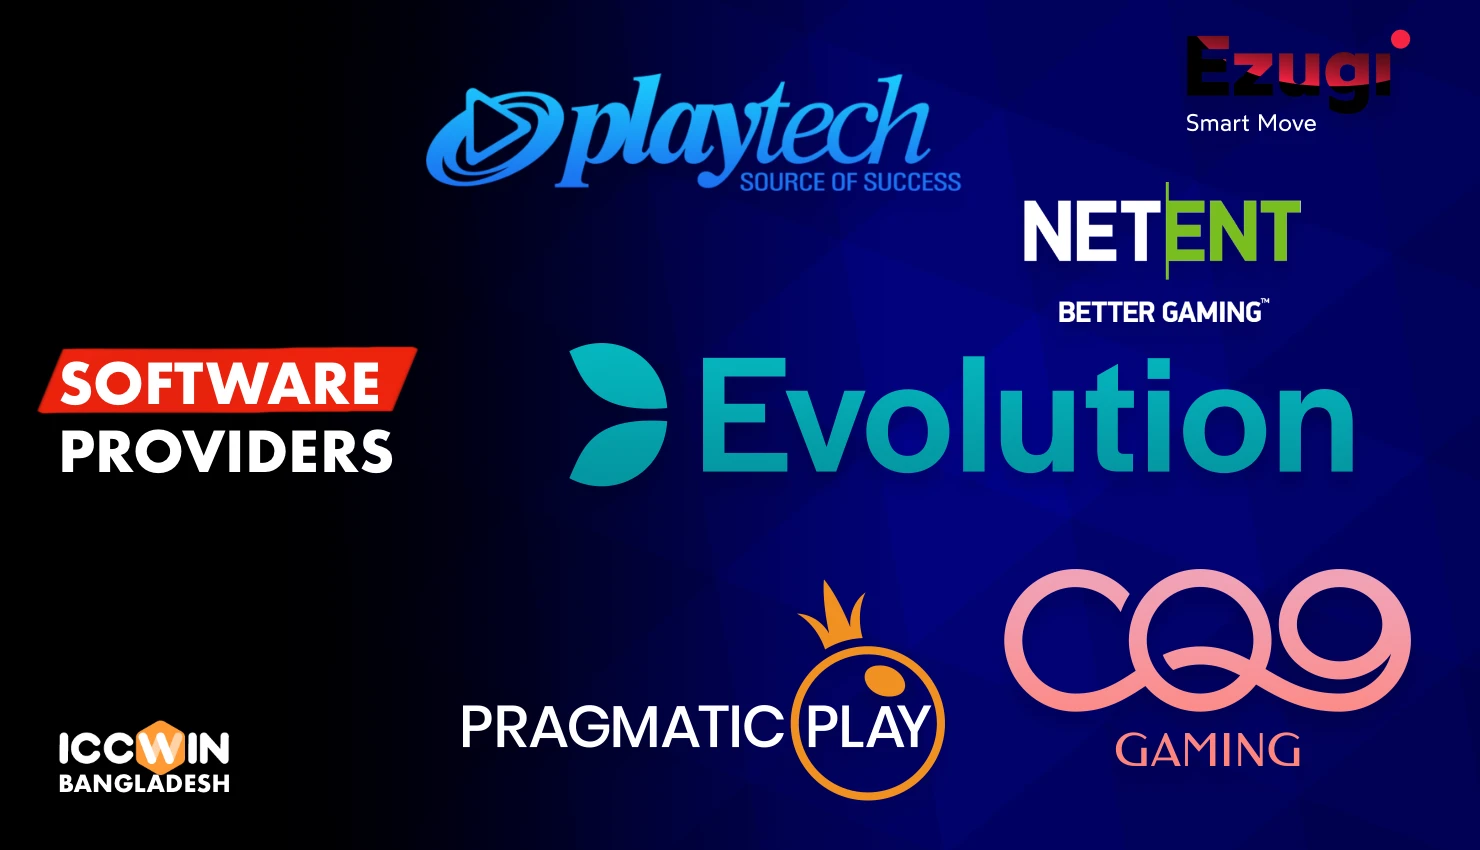 Iccwin Casino has selected the best games from leading software providers